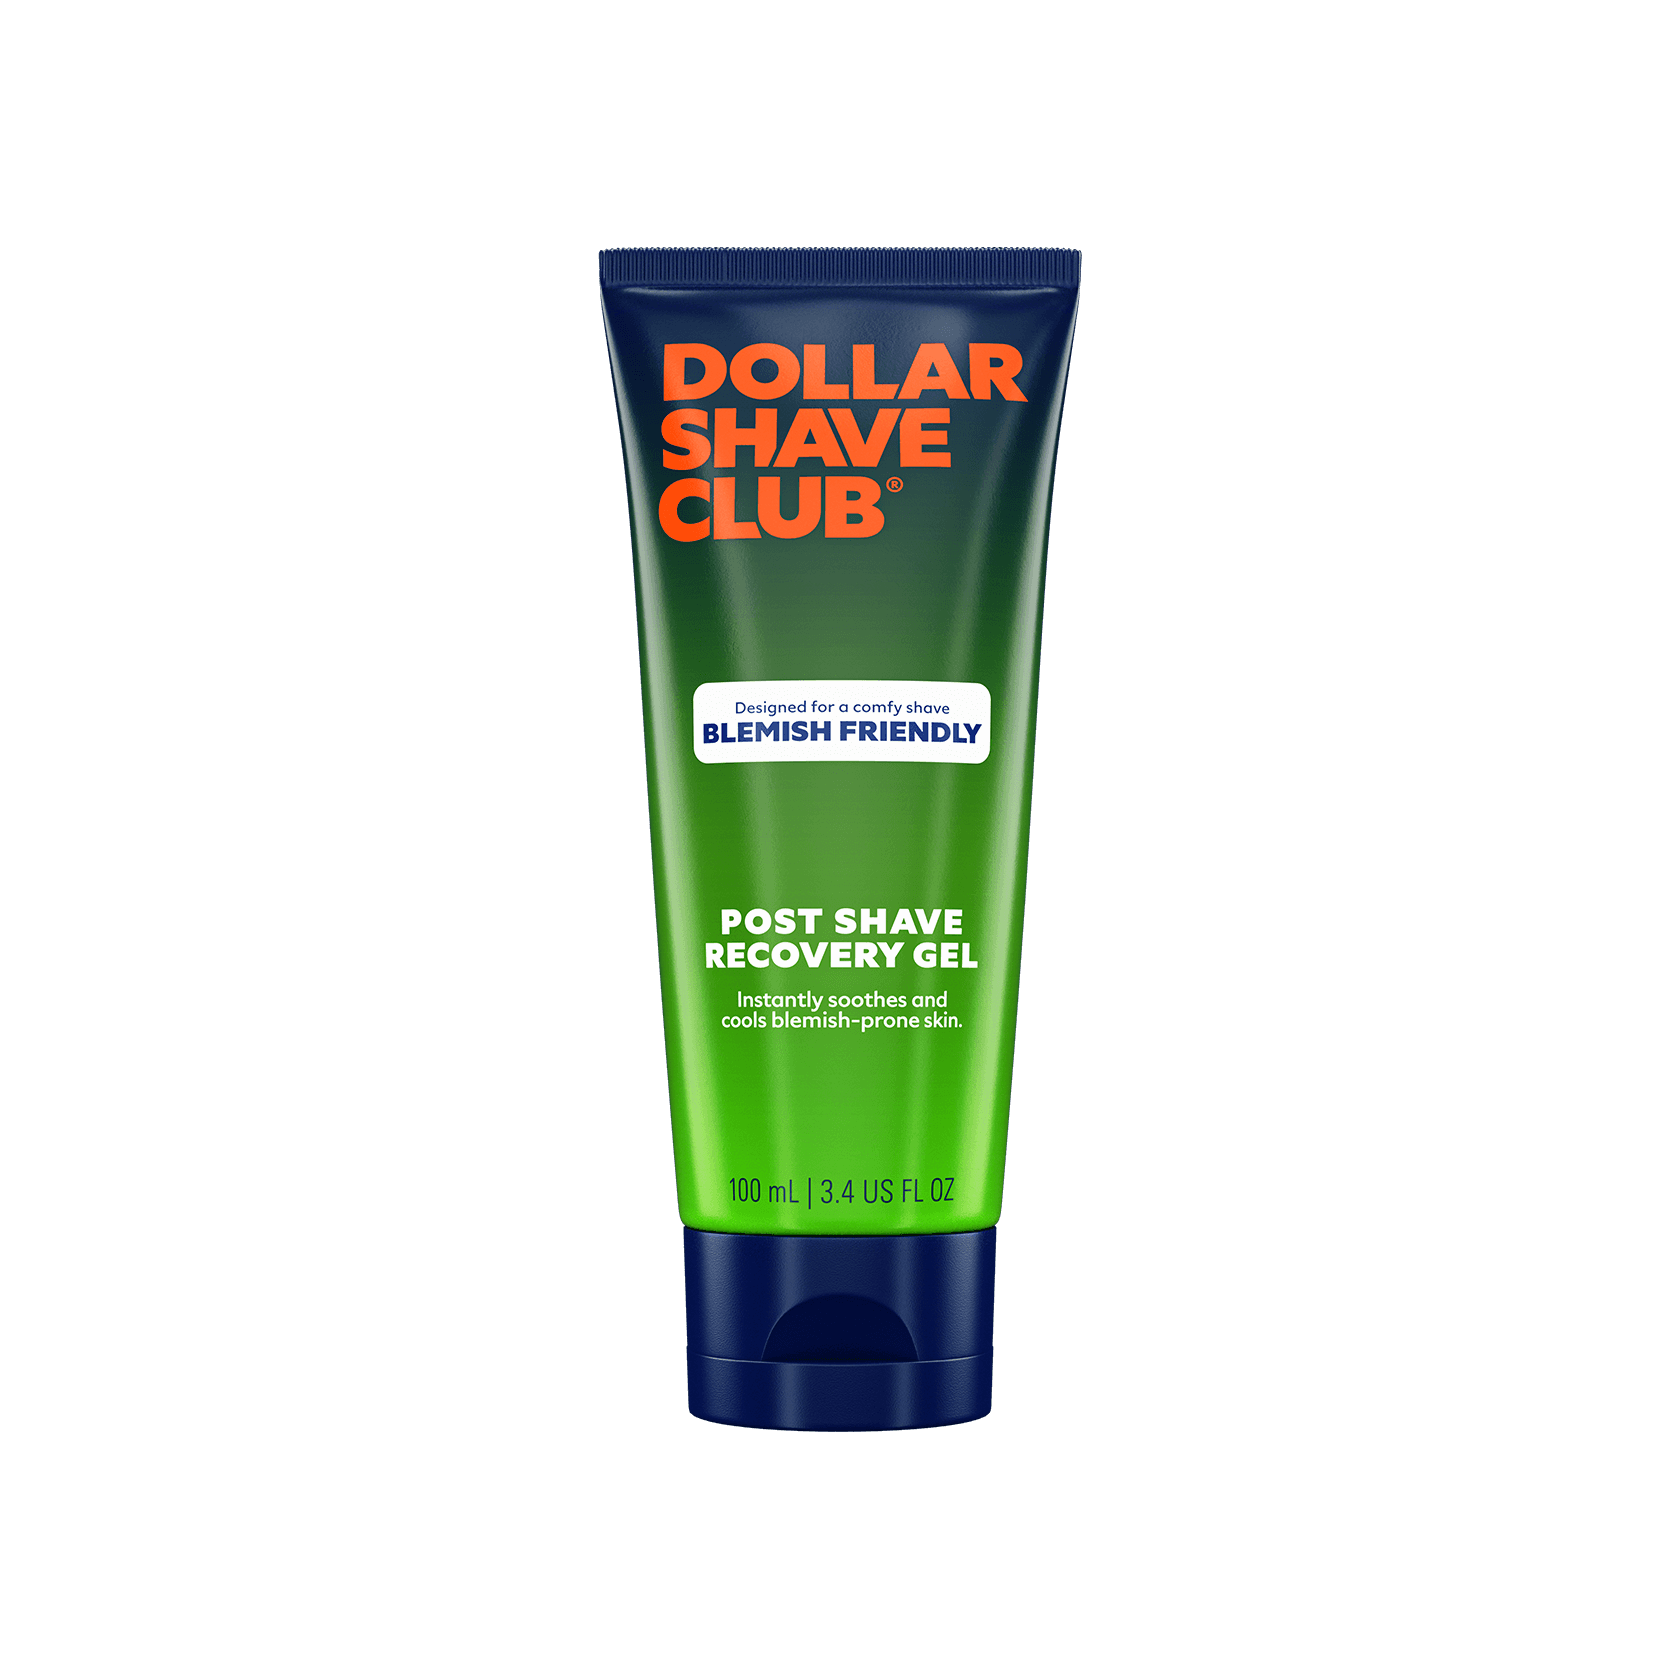 Product image of Blemish Friendly Post Shave Recovery Gel in green-gradient packaging tube.